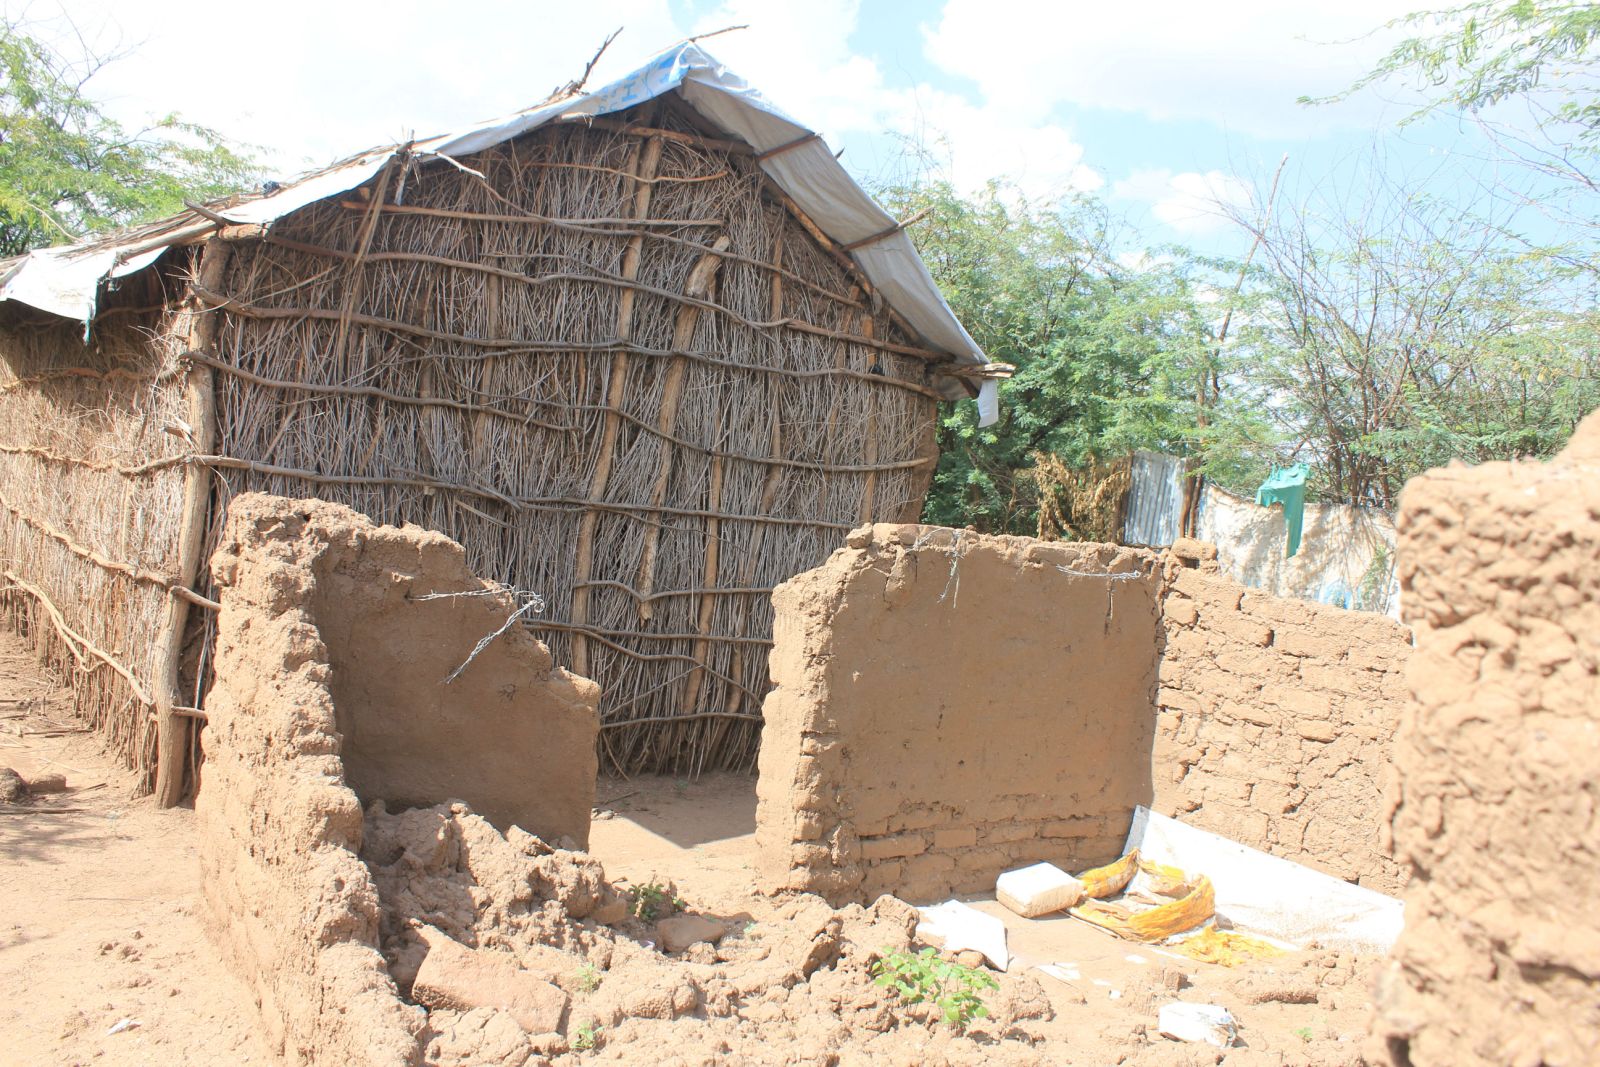 This mud-brick house collapsed after a flood.